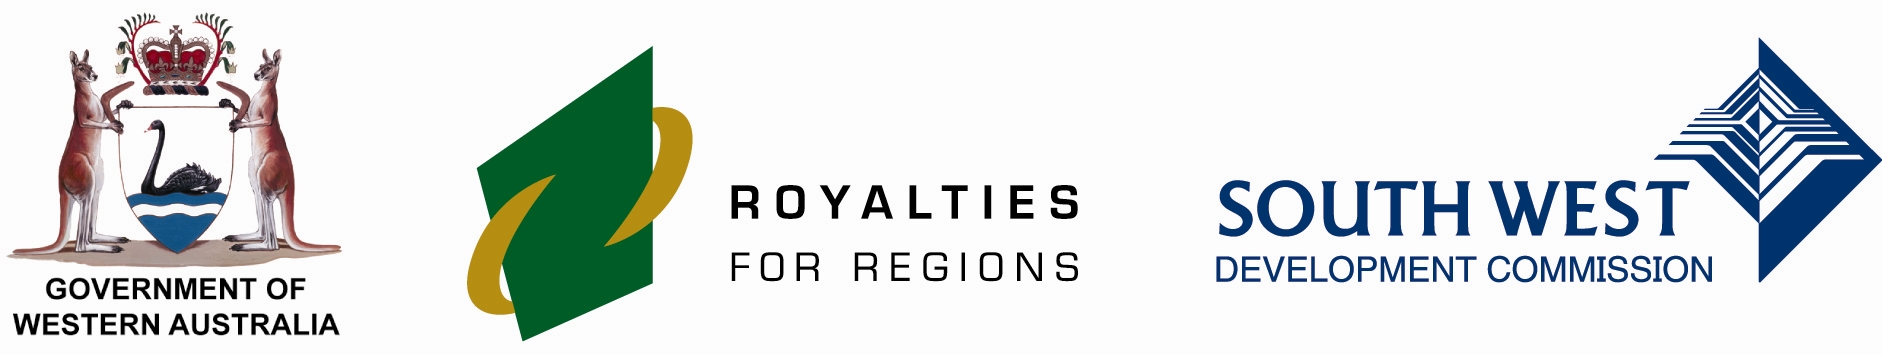 Logos - Government of Western Australia, Royalties for Regions, South West Development Commission.